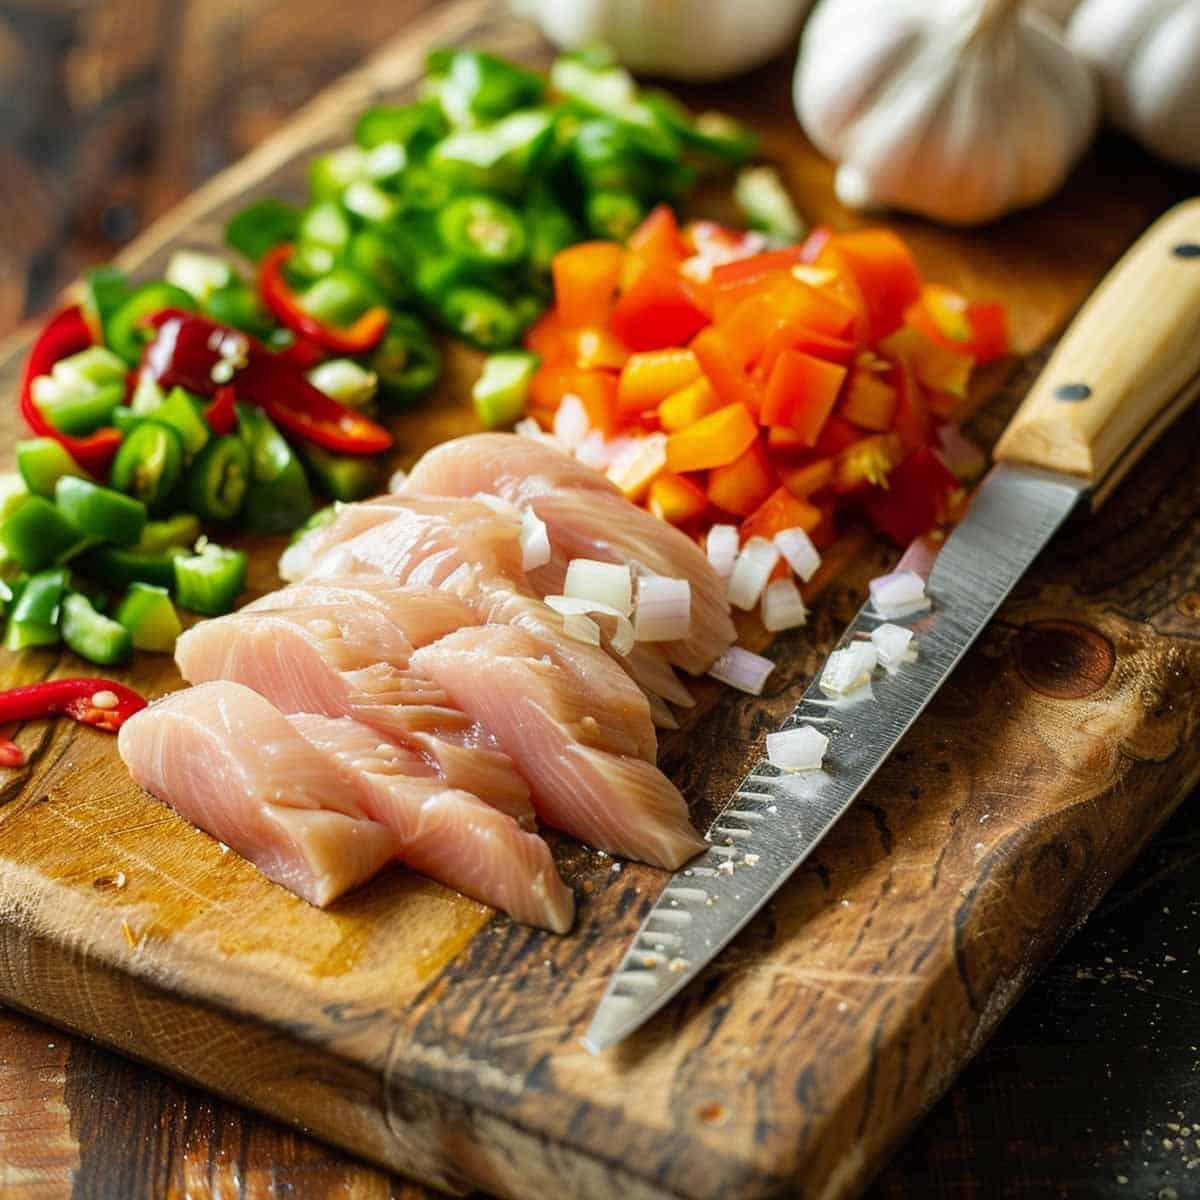 Cutting chicken for Pad Krapow Gai: finely chopping chicken breast on a wooden cutting board with garlic and chili nearby